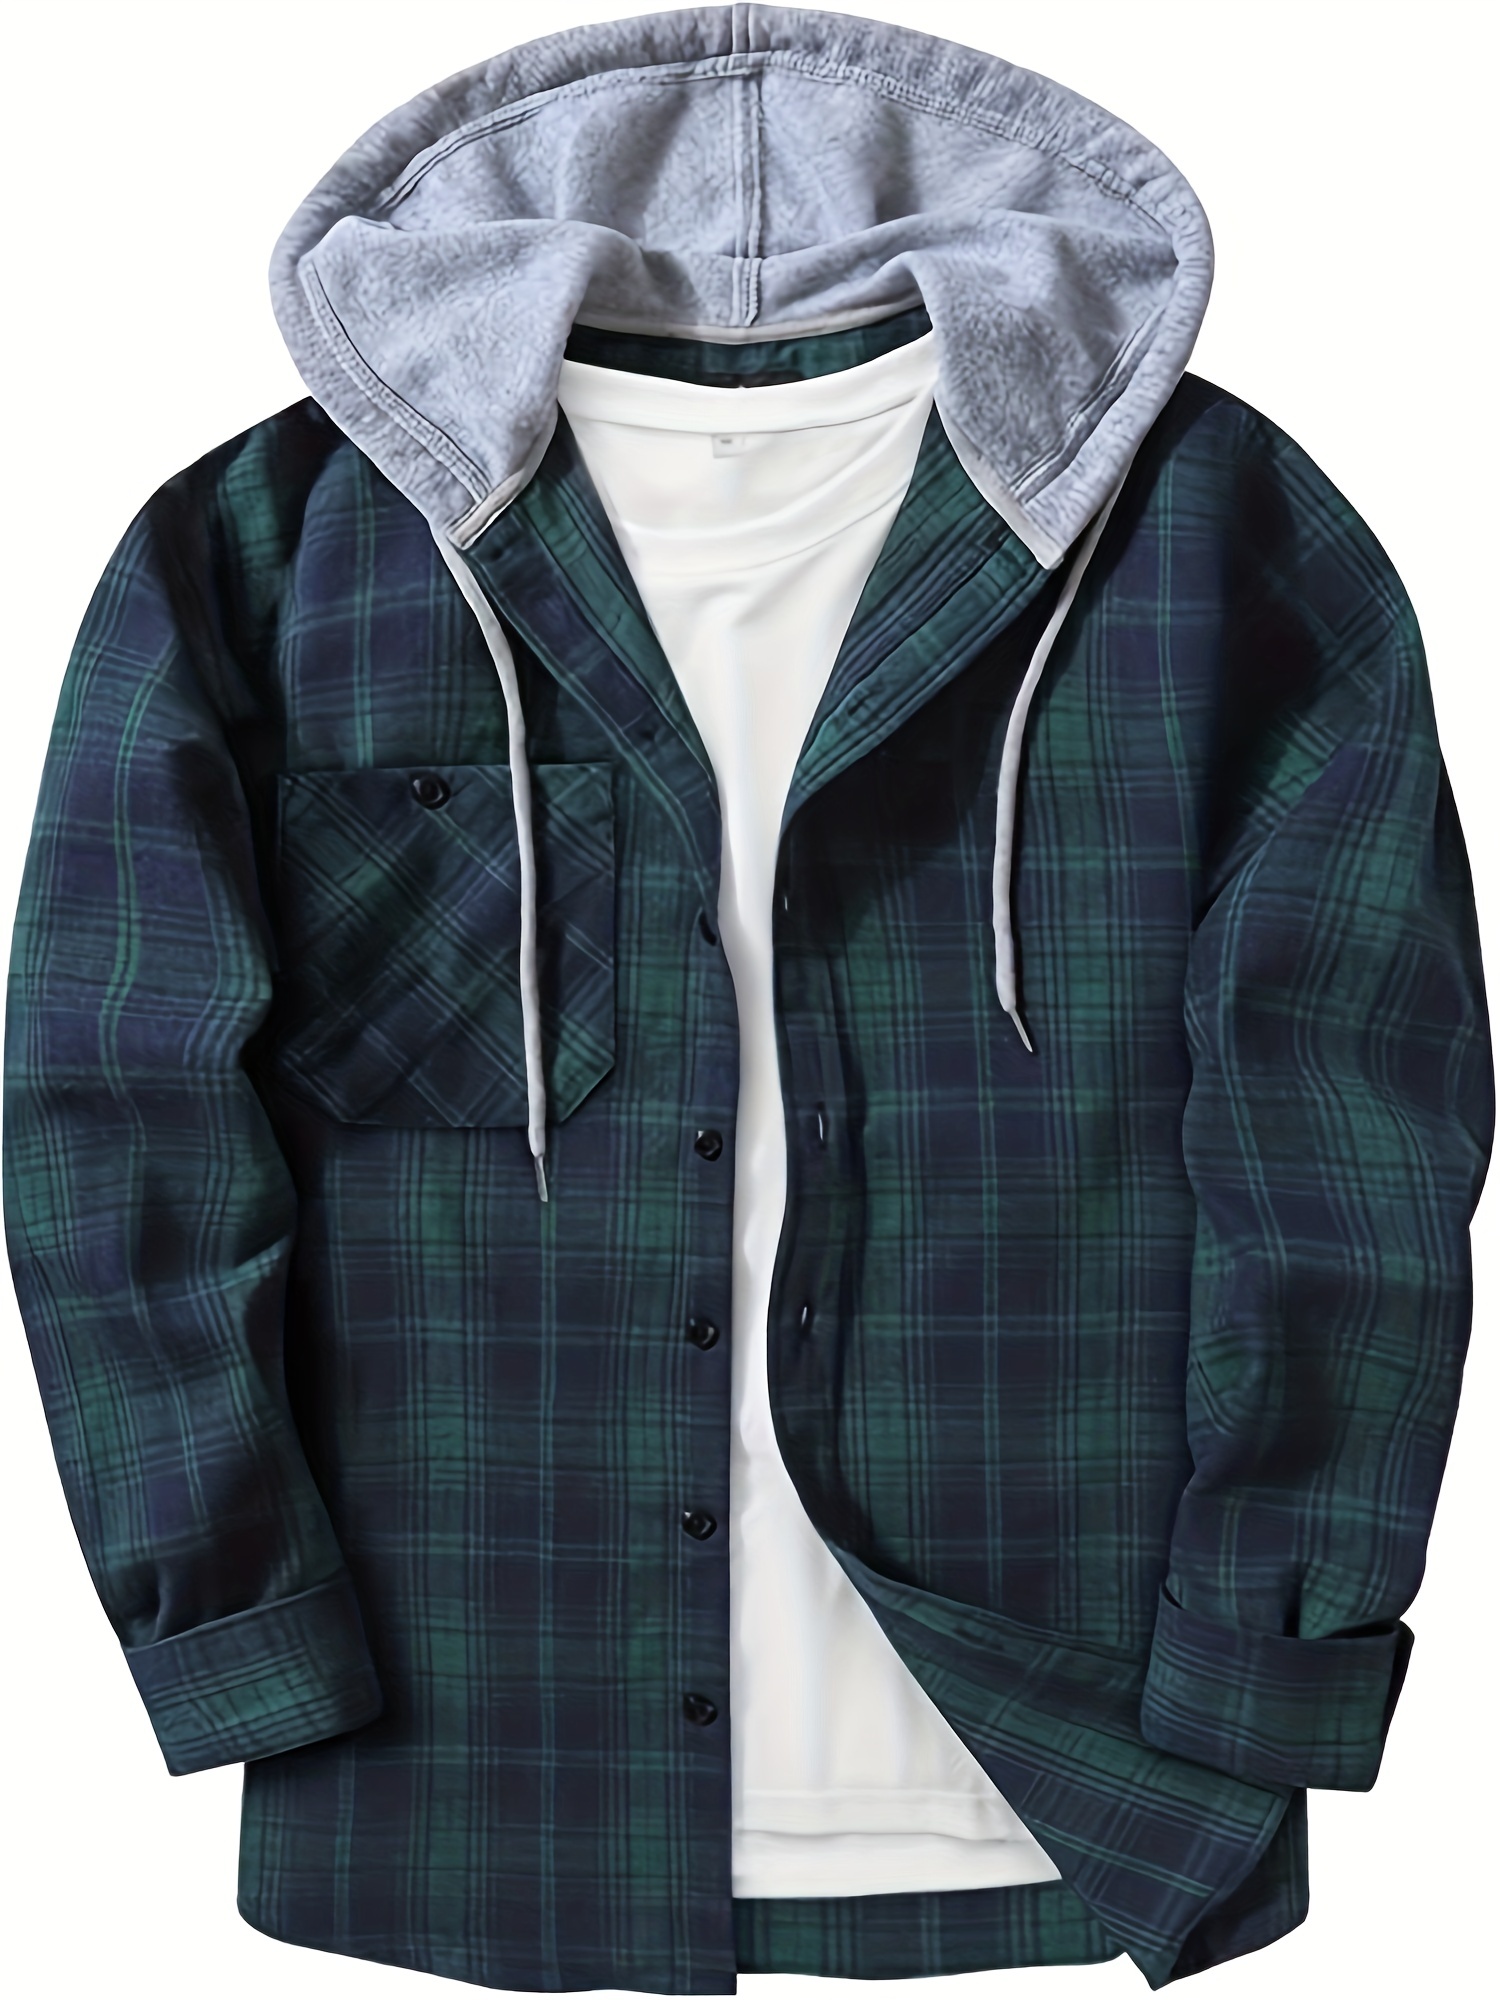 Men's Casual Green Flannel Plaid Hooded Jacket, Drawstrings